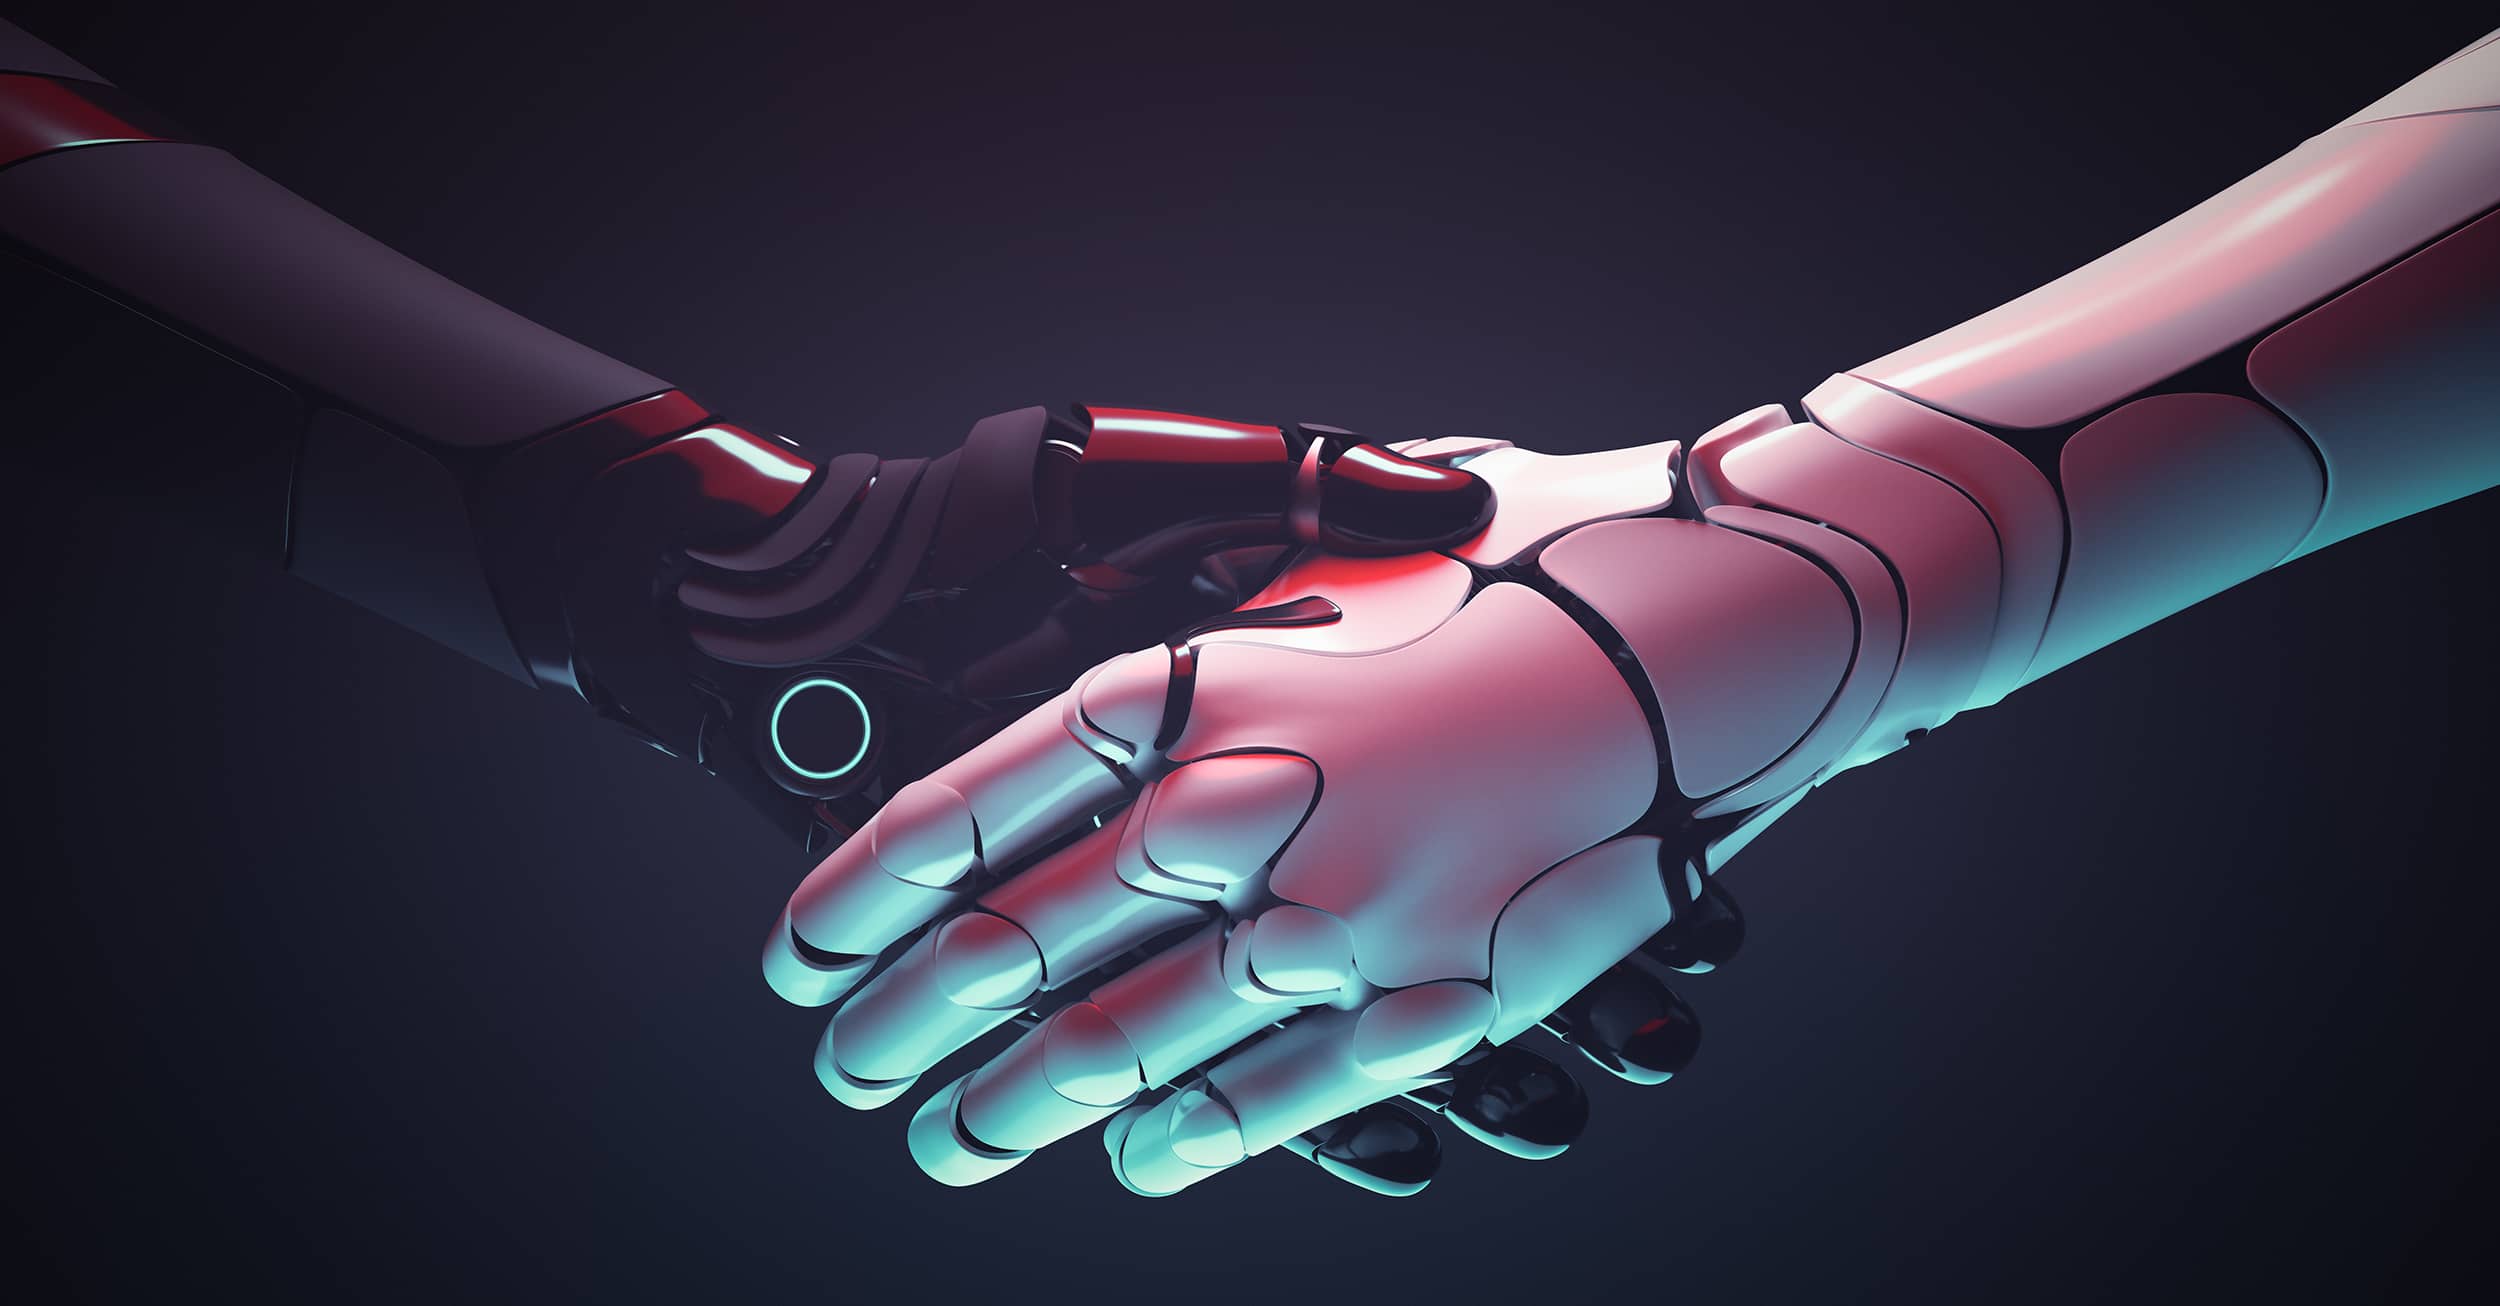 Two robots shake hands over a premium domain deal.